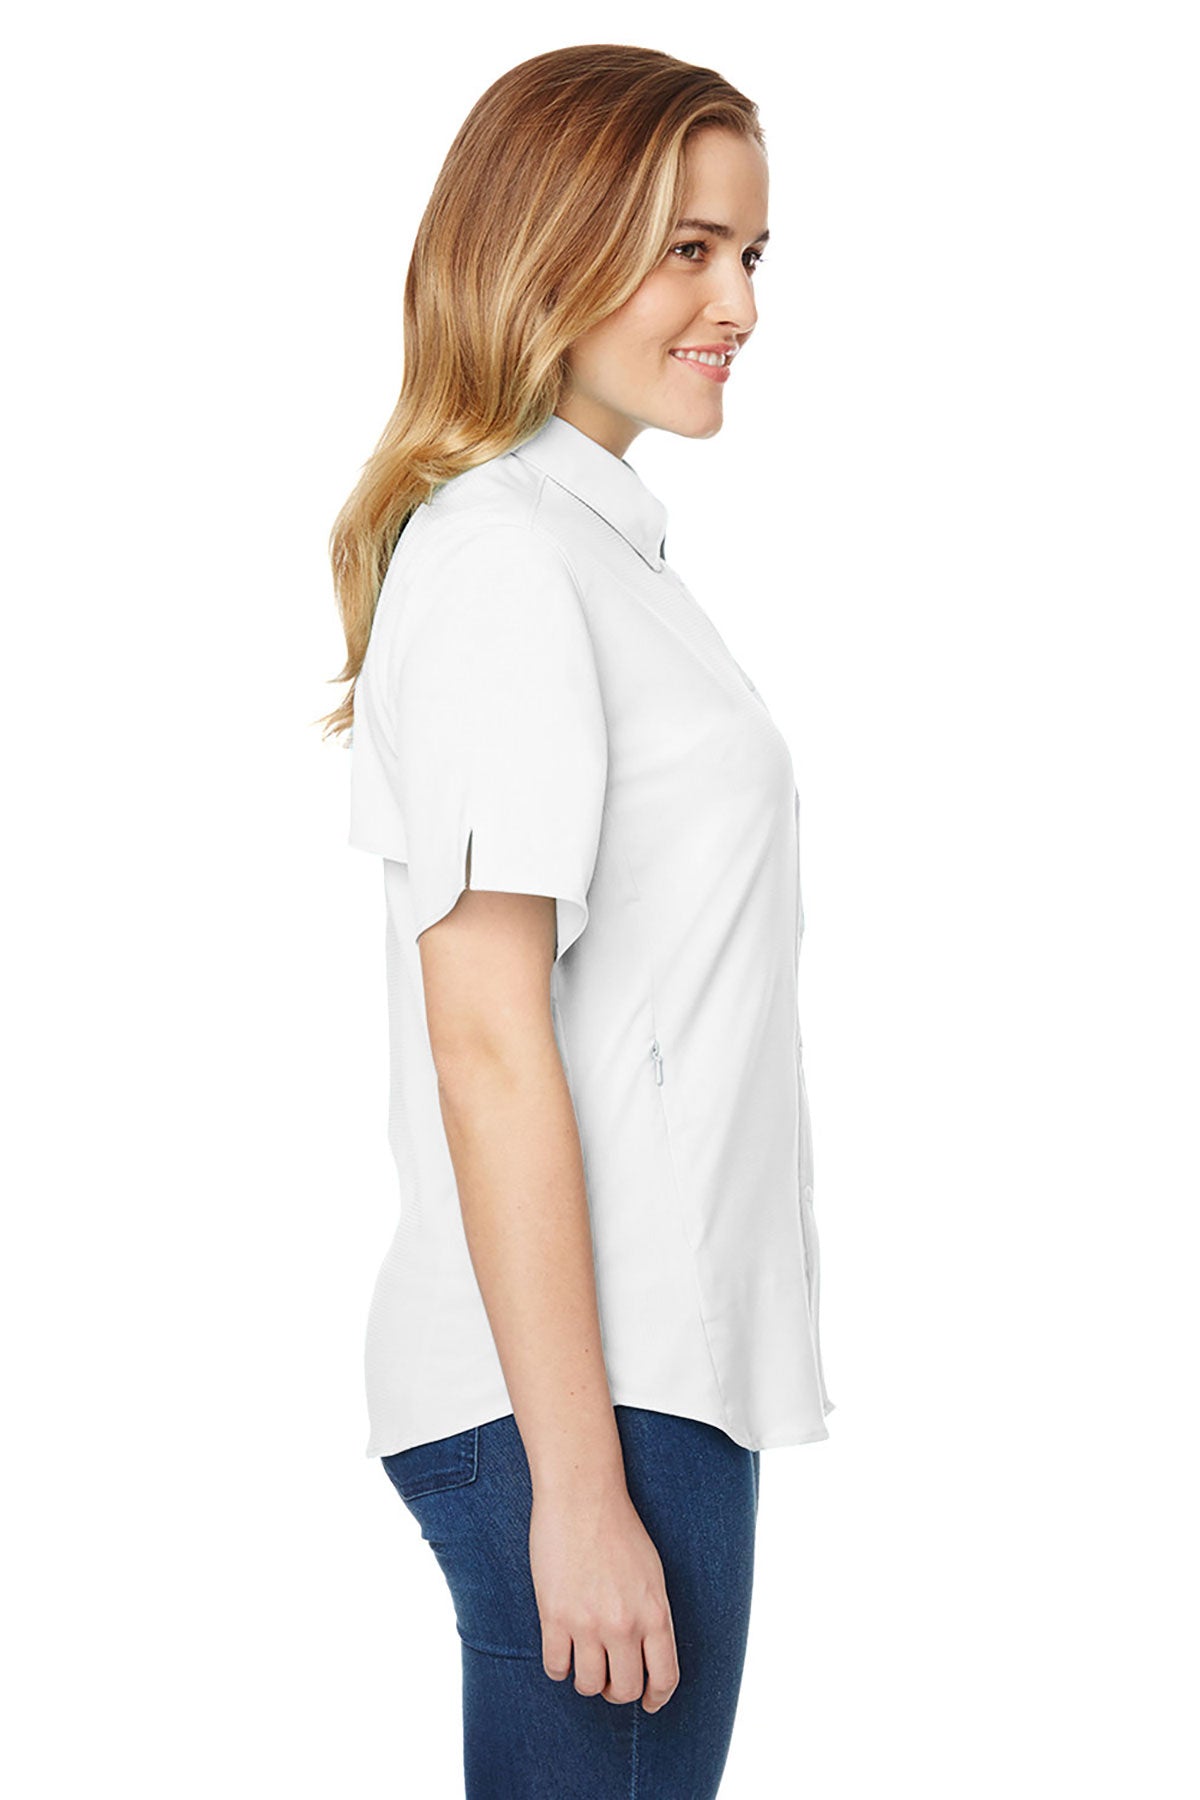 Columbia Ladies Tamiami II Short Sleeve Shirt, White [GuidePoint Security]